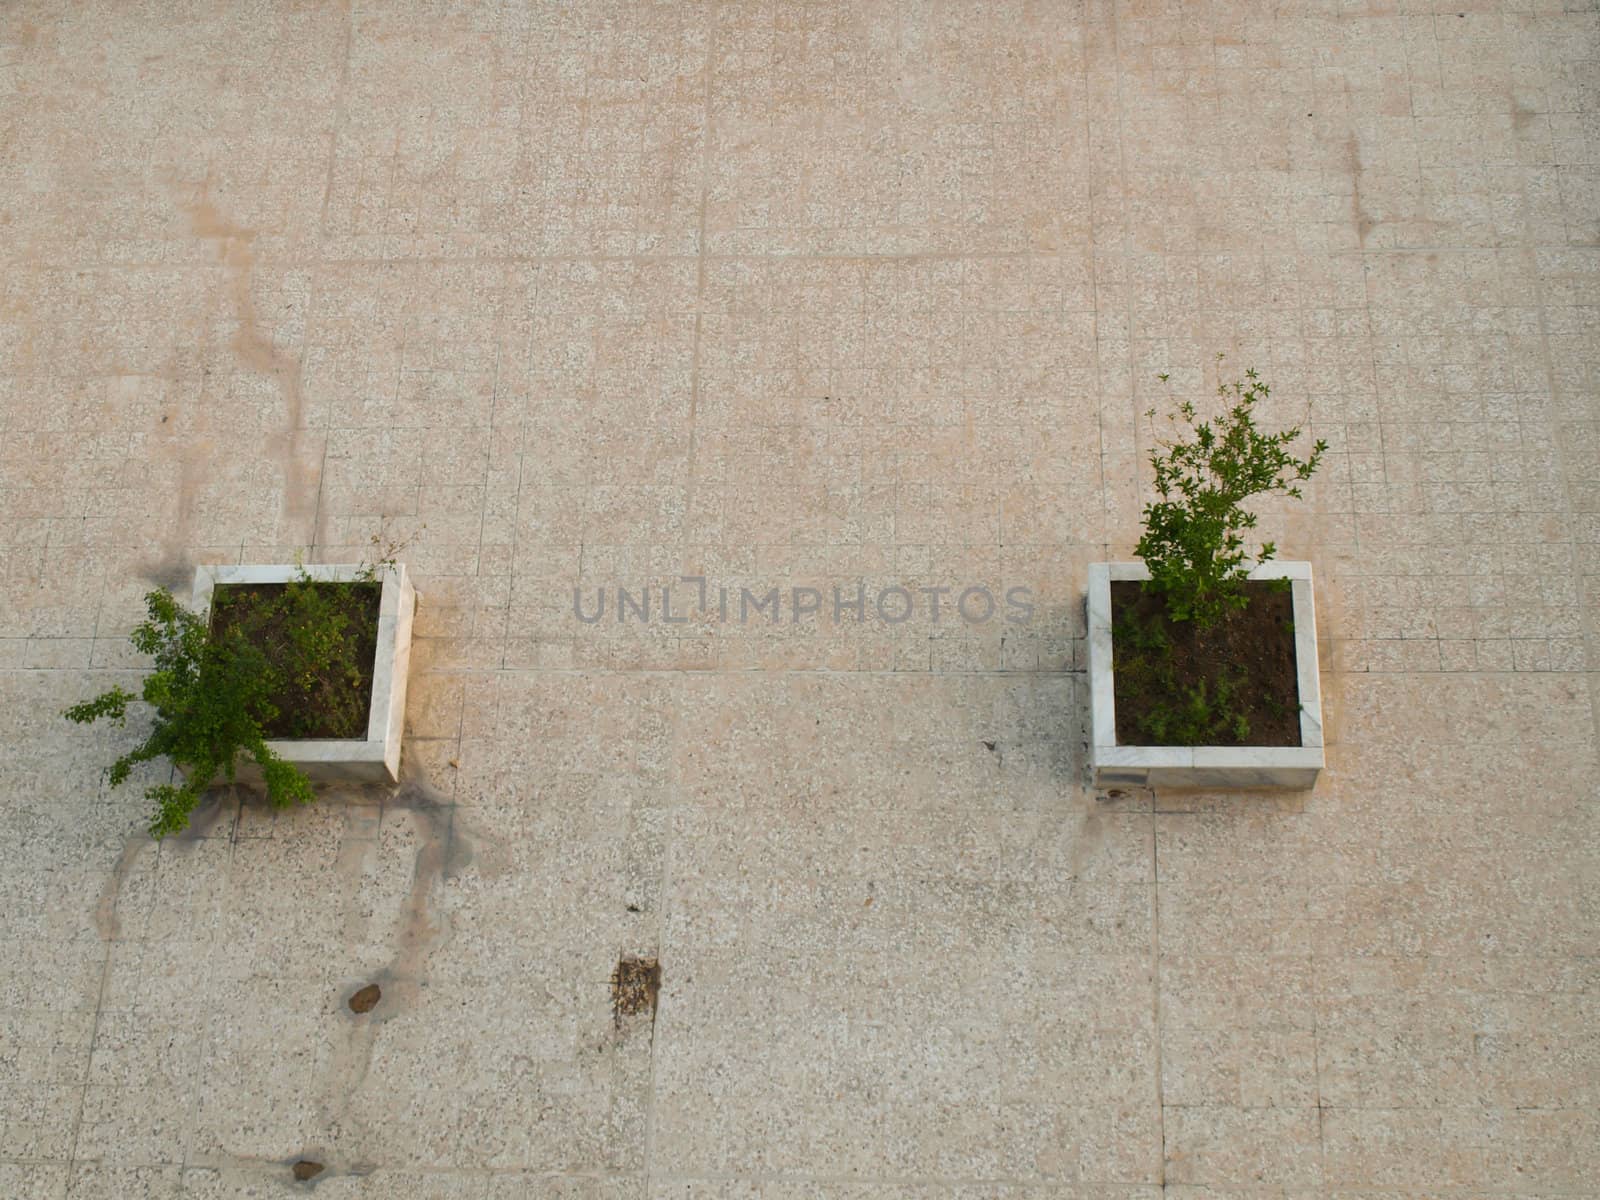 Top view of double trees planted on a marble box on tiles floor by gururugu